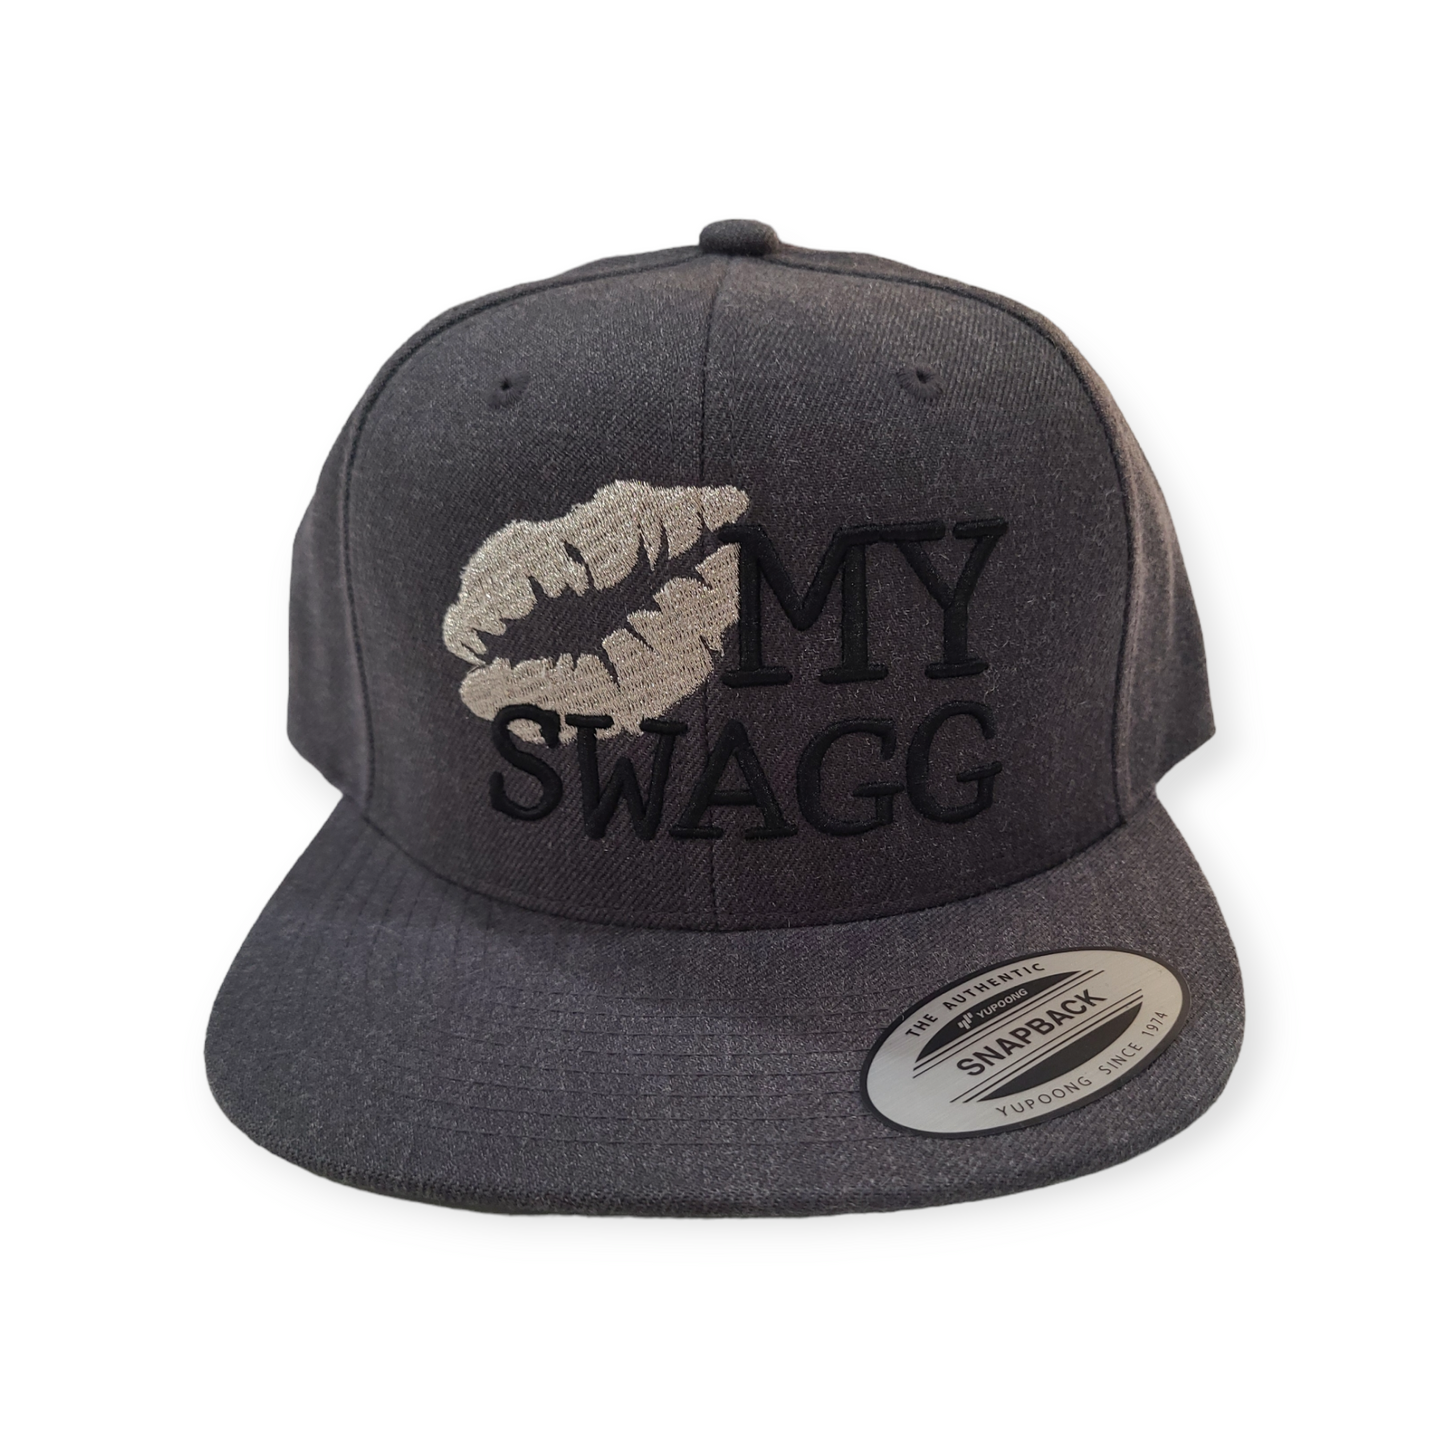 Kiss My Swagg - Quick Silver Snapback Hat